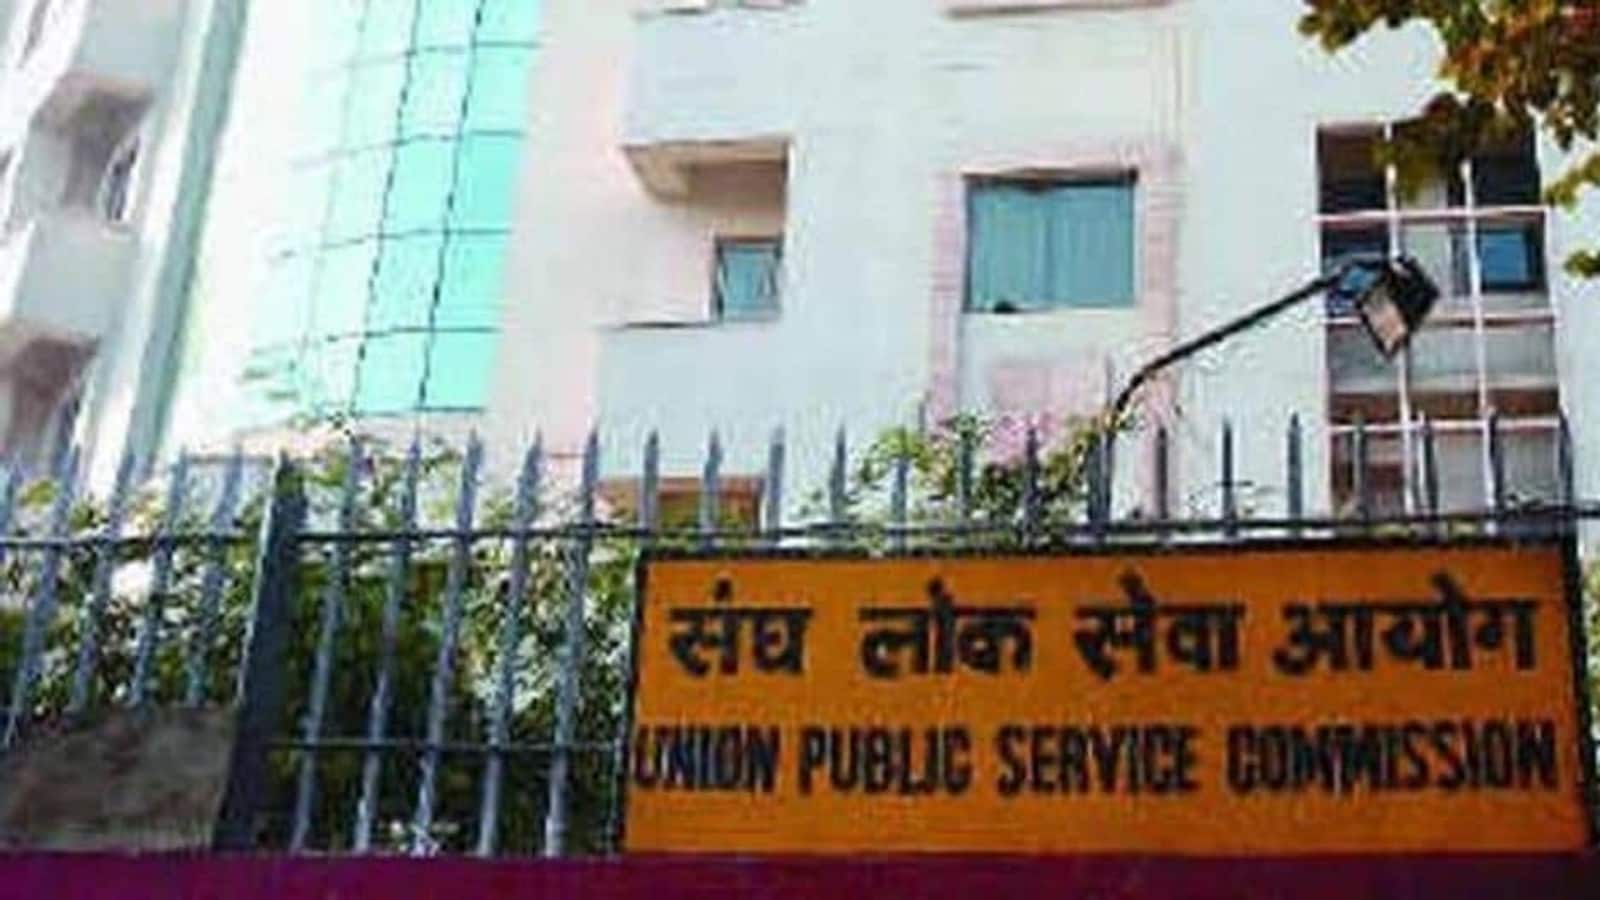 UPSC NDA & CDS I 2023: Last date today to apply at upsc.gov.in